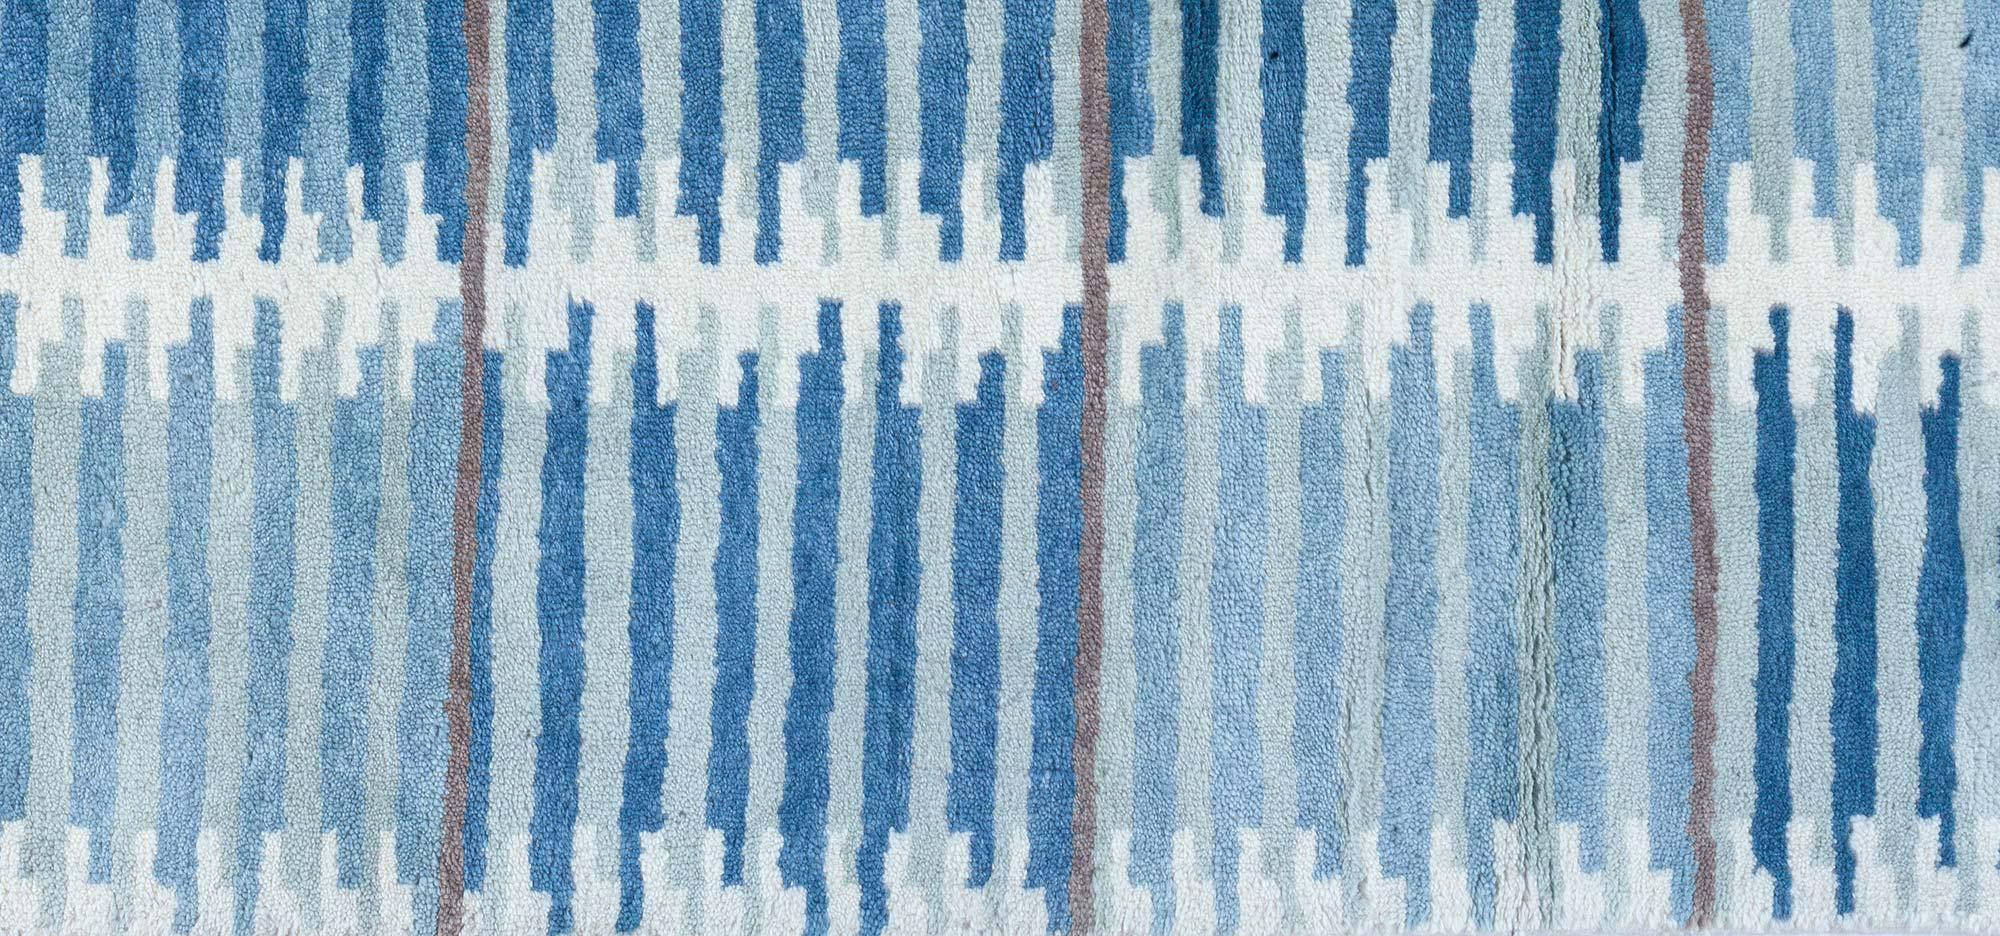 Modern Swedish design blue hand knotted wool pile rug.
Size: 11'10